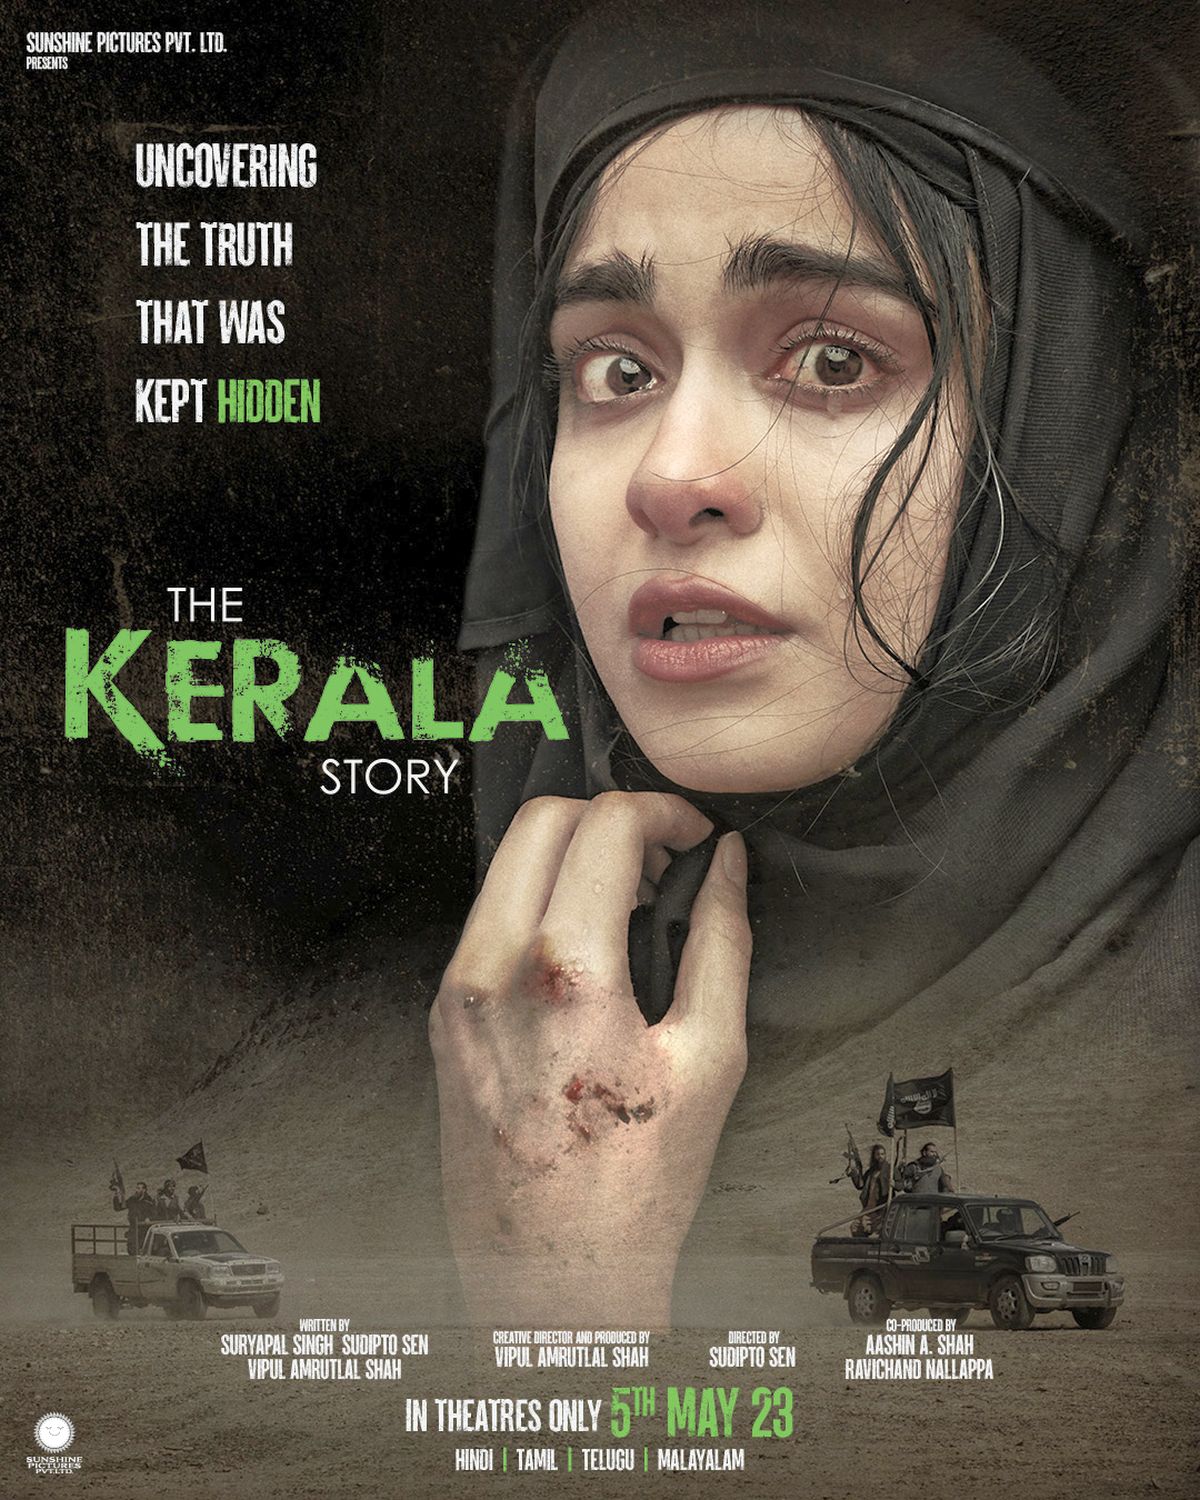 Movie halls in Bengal yet to screen 'Kerala Story'